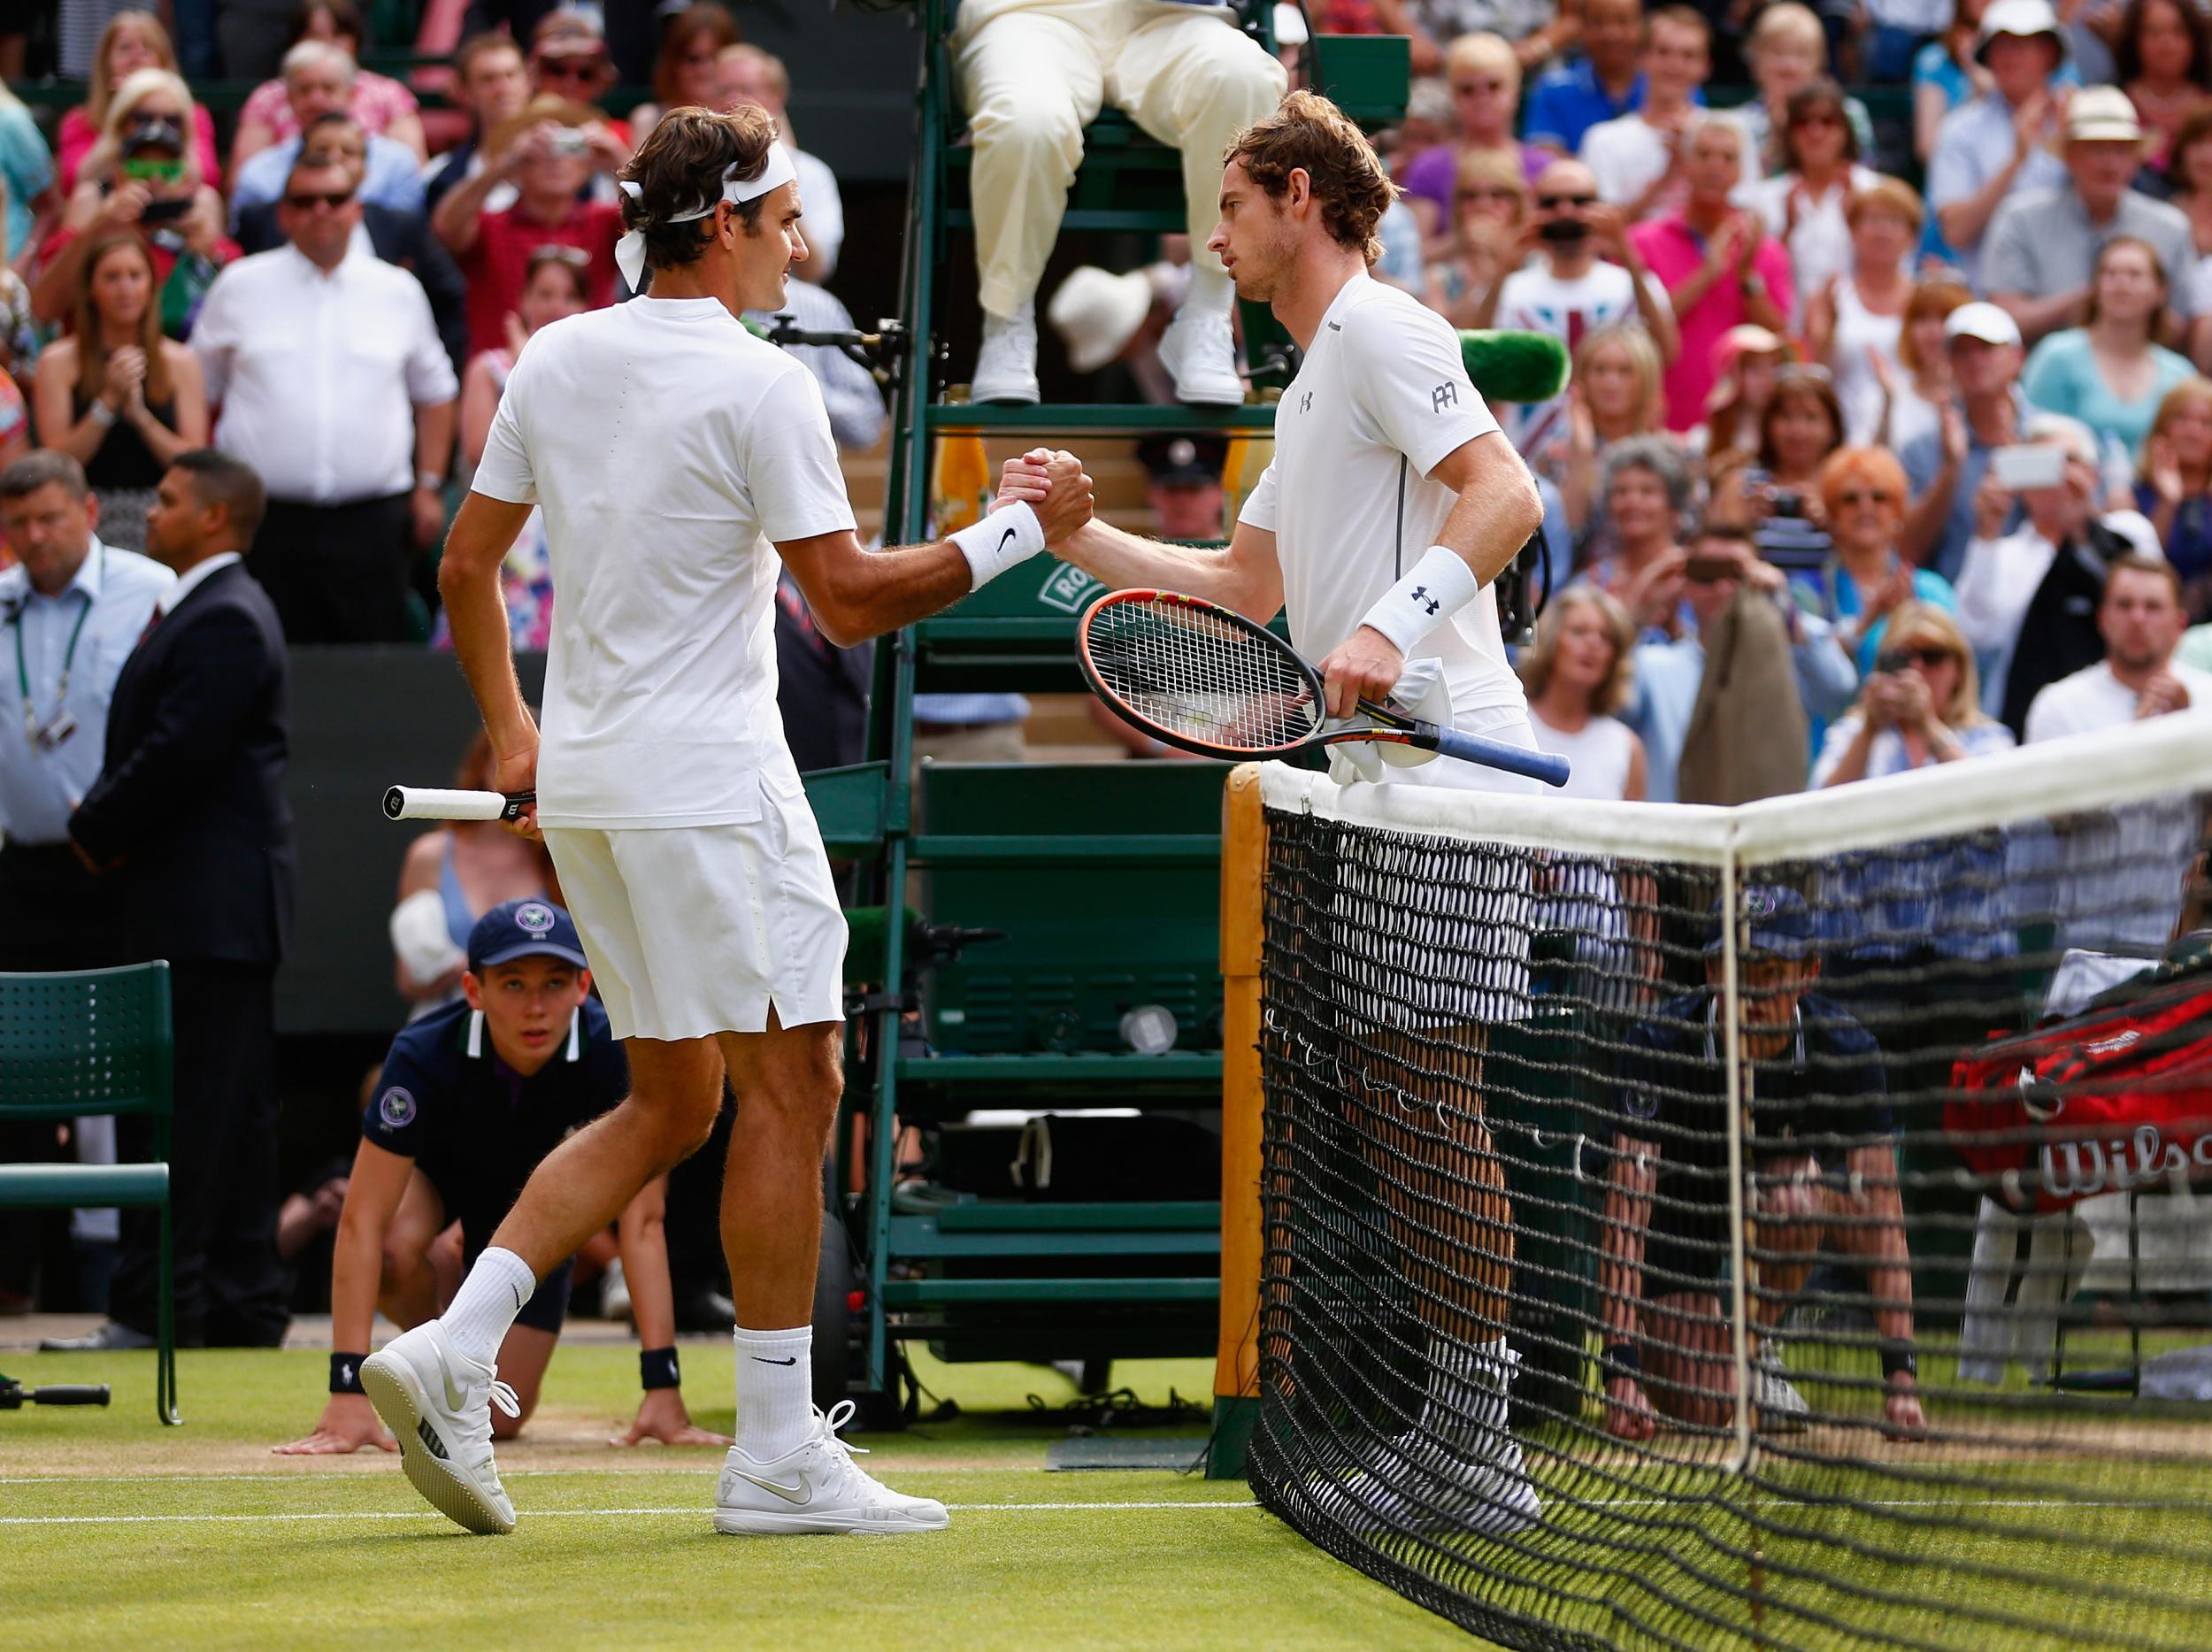 &#13;
Federer praised Murray for being "as tough as nails" &#13;